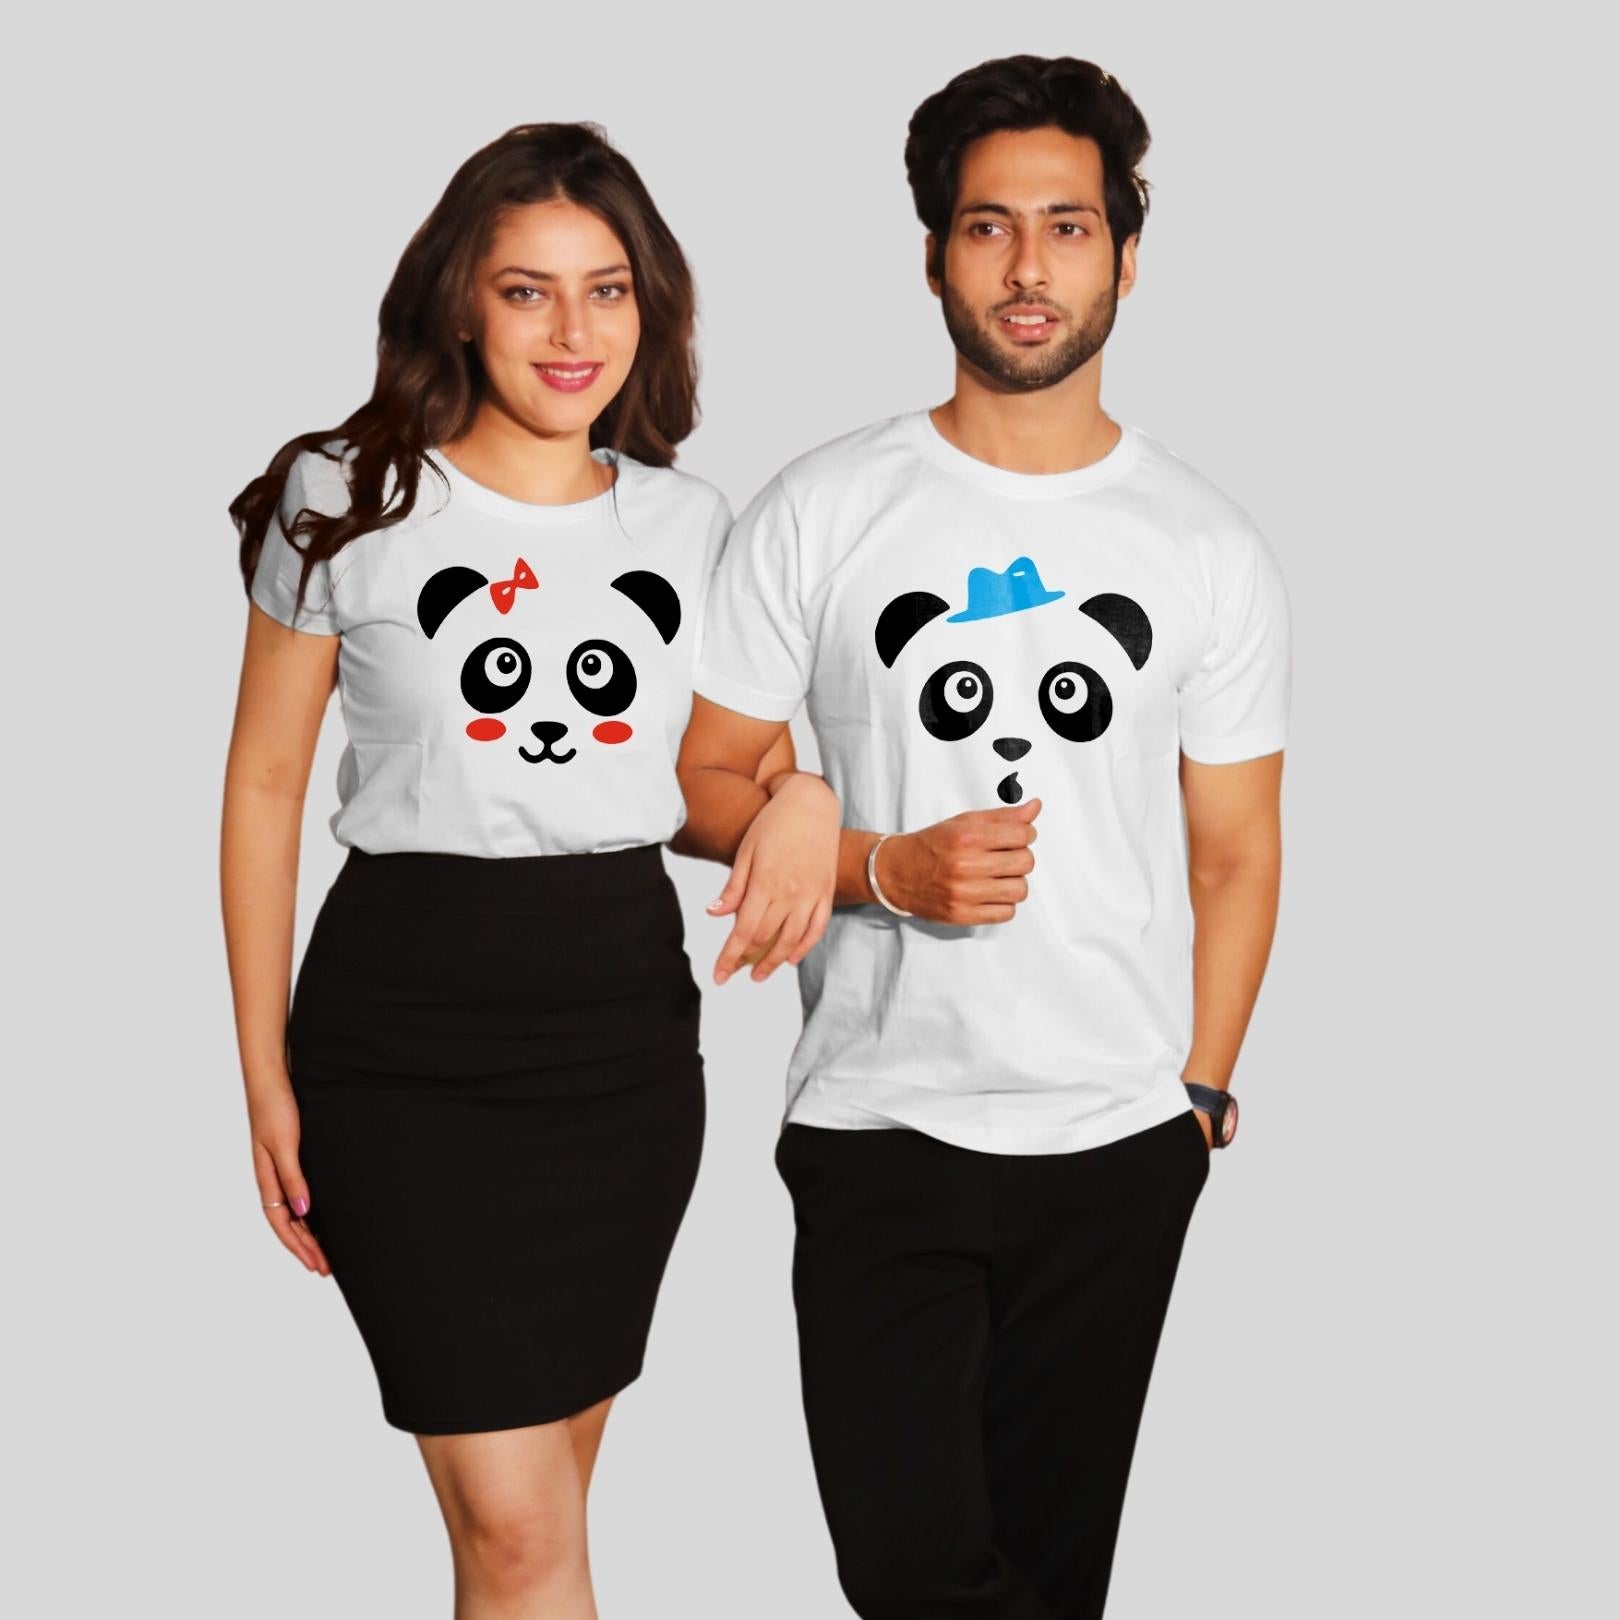 Couple T Shirt In white Colour - Cartoon faces Variant